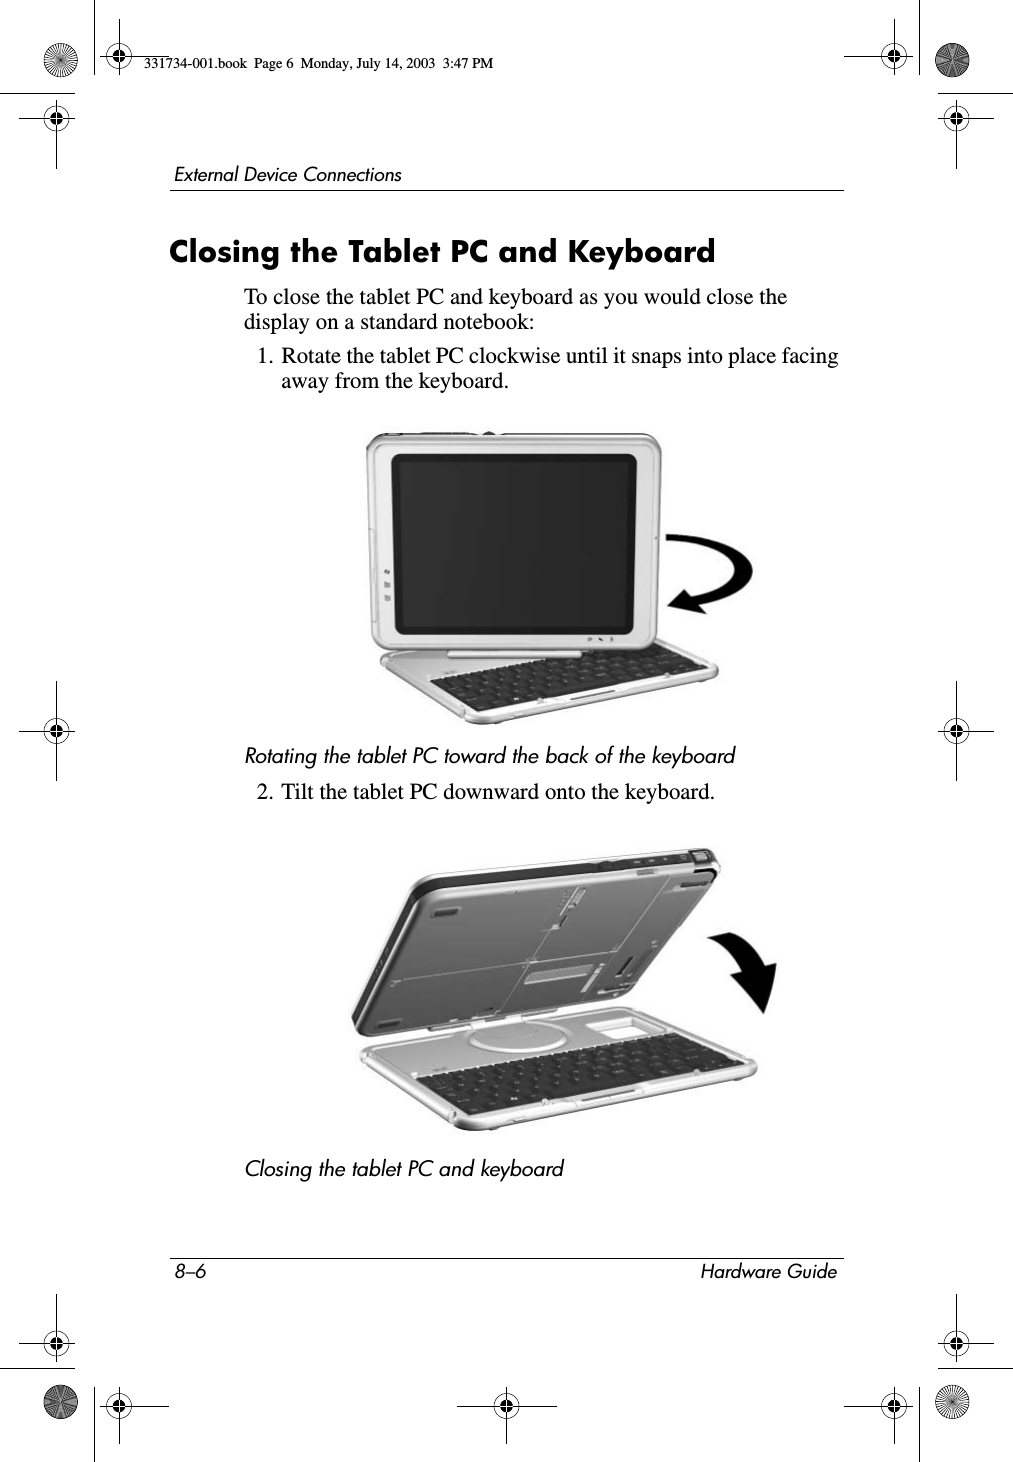 8–6 Hardware GuideExternal Device ConnectionsClosing the Tablet PC and KeyboardTo close the tablet PC and keyboard as you would close the display on a standard notebook:1. Rotate the tablet PC clockwise until it snaps into place facing away from the keyboard.Rotating the tablet PC toward the back of the keyboard2. Tilt the tablet PC downward onto the keyboard.Closing the tablet PC and keyboard331734-001.book  Page 6  Monday, July 14, 2003  3:47 PM